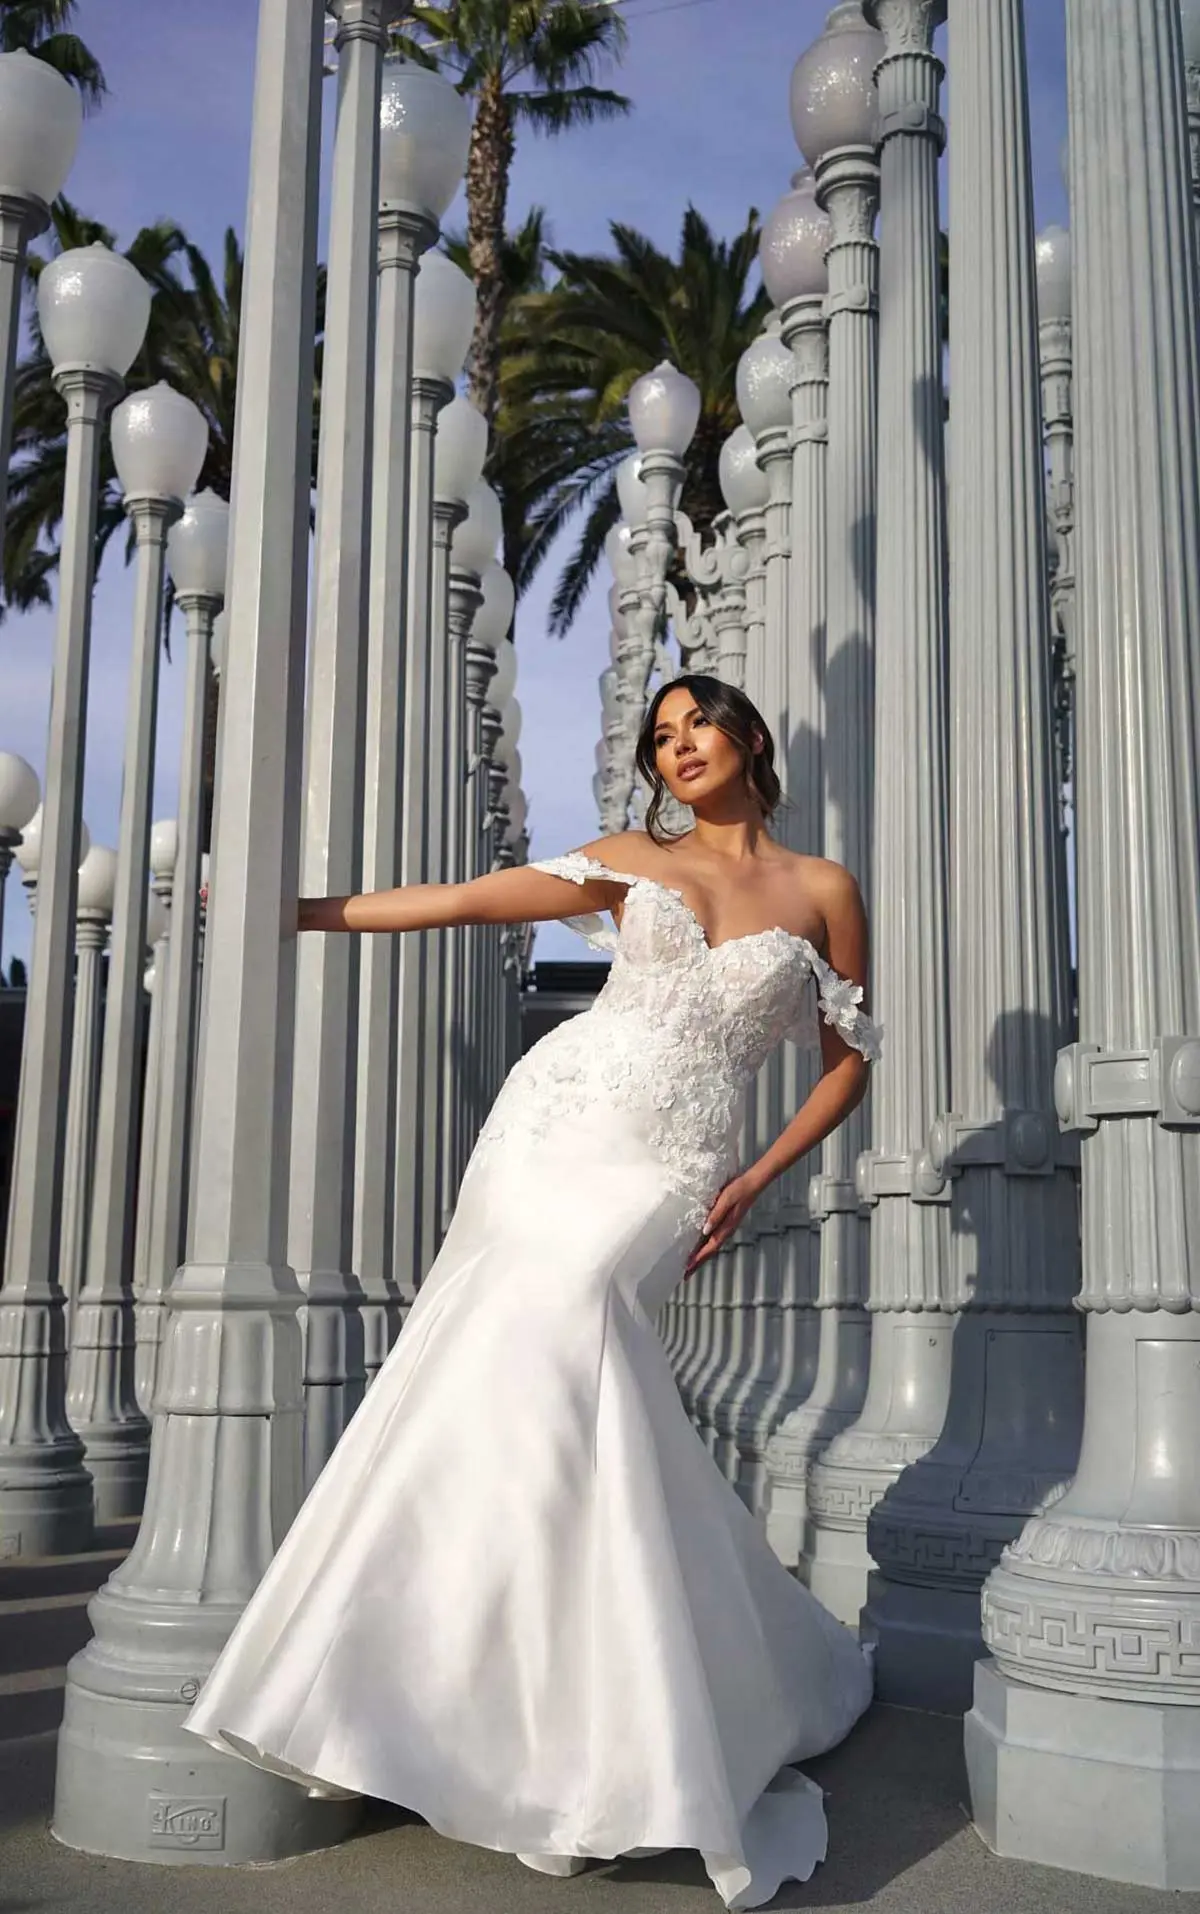 Modern Fit-and-Flare Wedding Dress with Graphic Lace - Martina Liana  Wedding Dresses